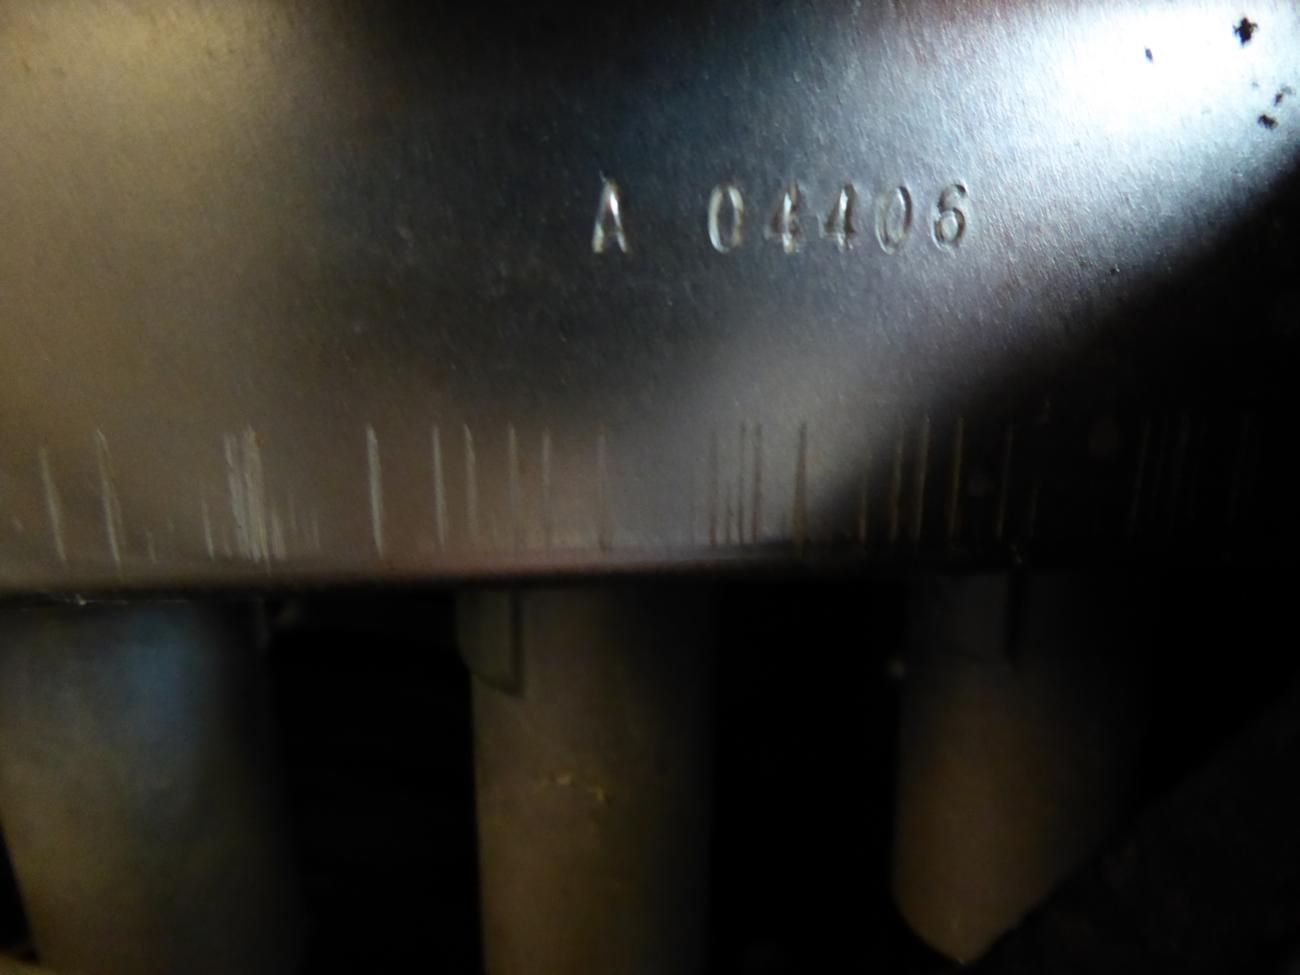 Fender Blackface Vibrolux Reverb Amp, made in U.S.A., serial number A04406, with soft cover - Image 4 of 4